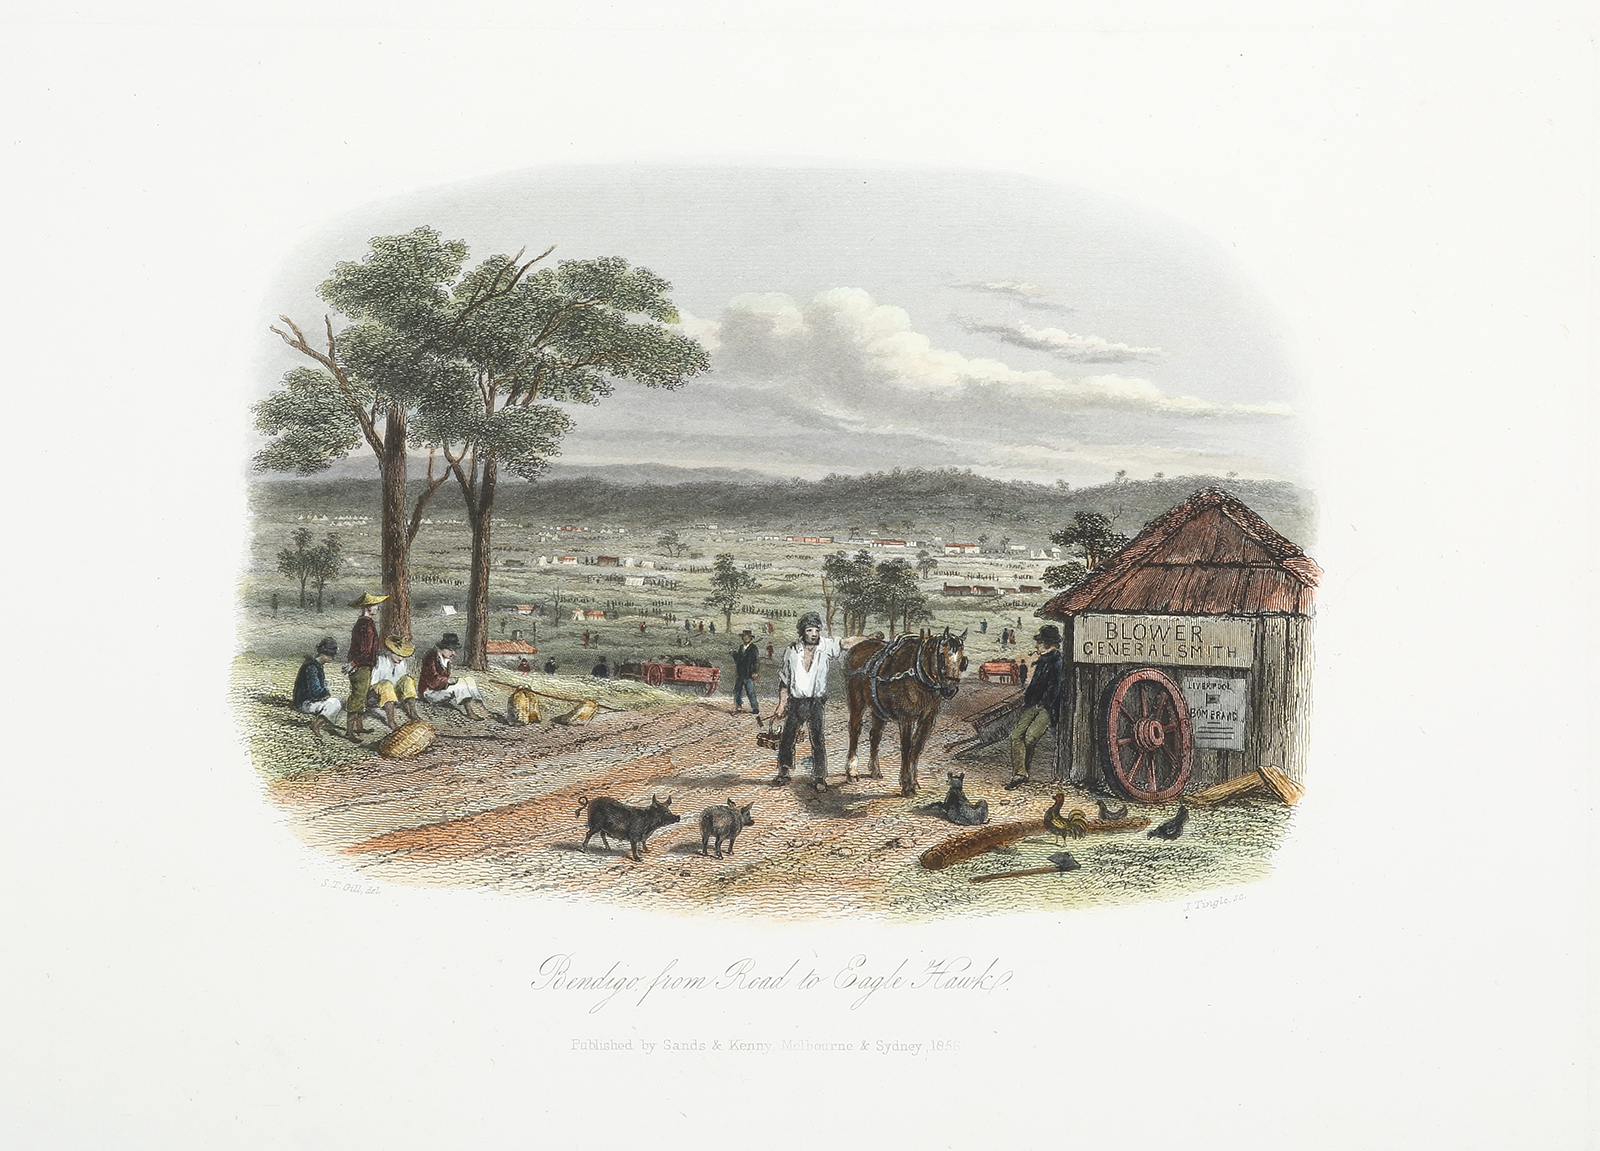 Market Square, Looking N.E. from Malop St. Geelong. - Antique View from 1857